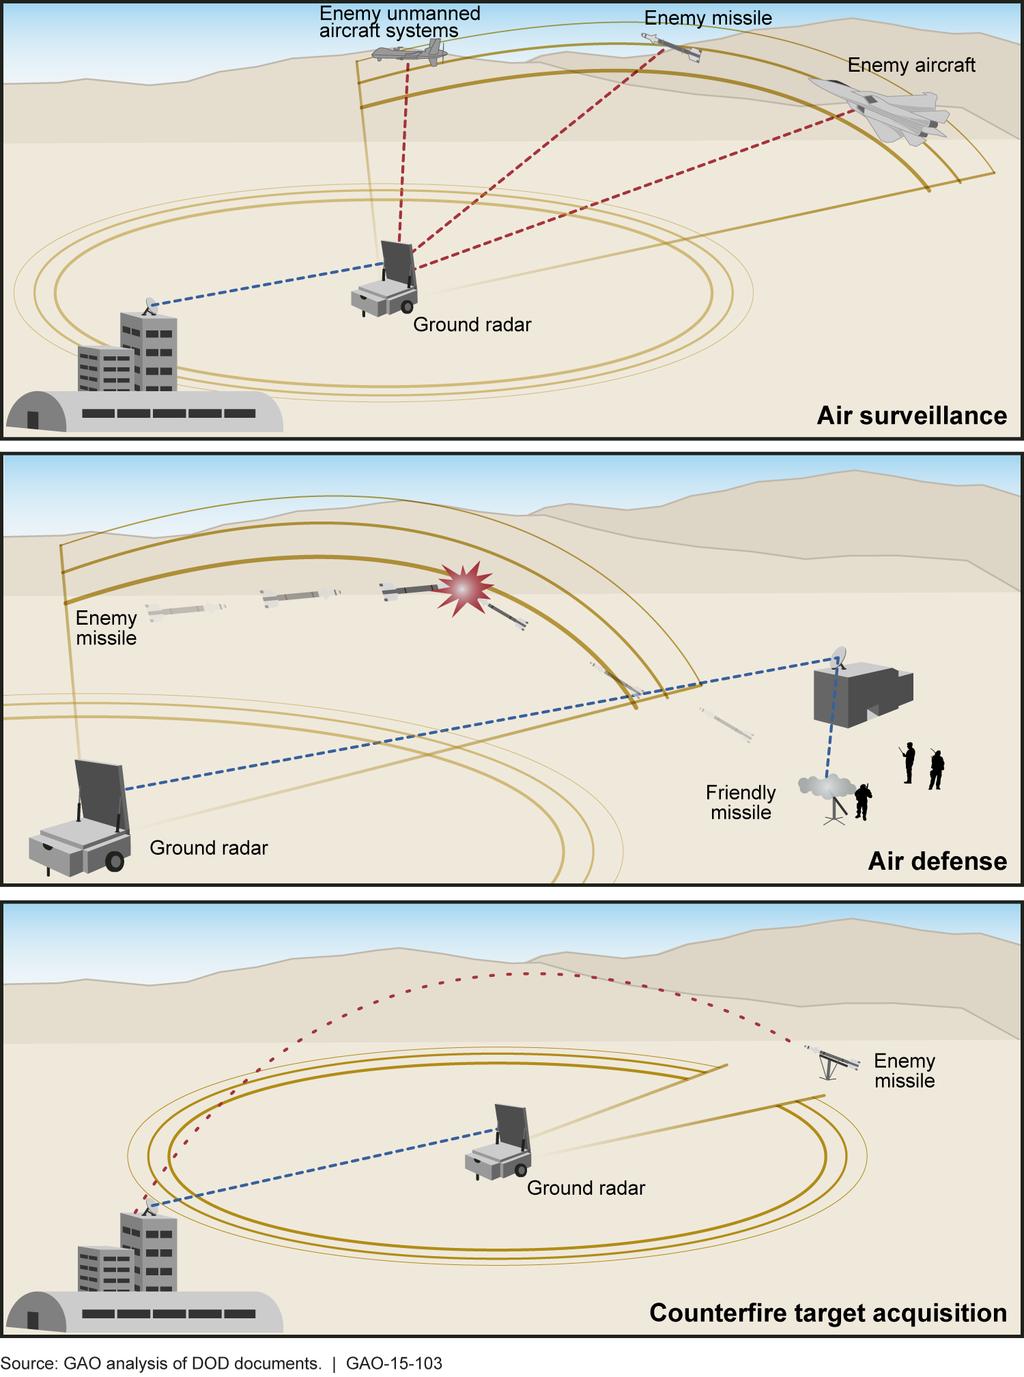 Counterfire target acquisition detect and track enemy rockets, artillery, and mortars to determine enemy firing